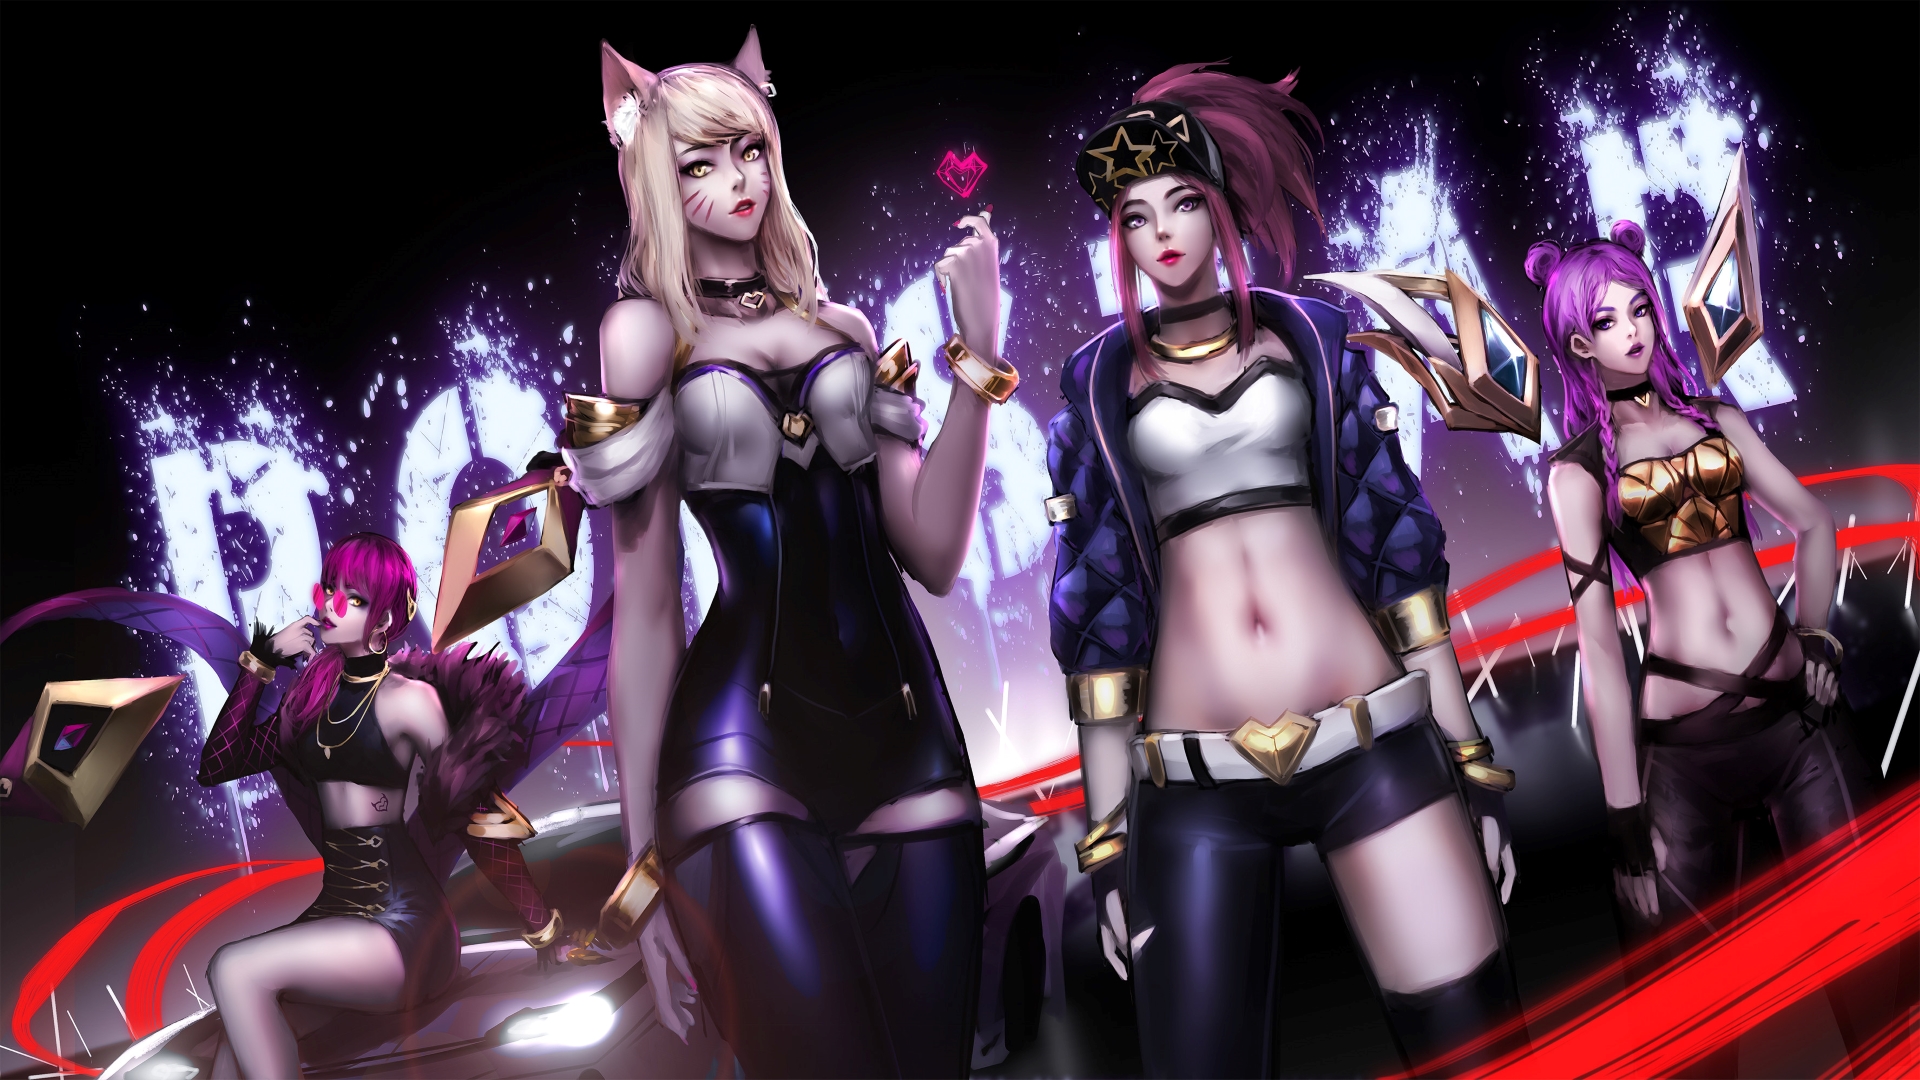 General 1920x1080 artwork video game girls video game characters League of Legends Ahri (League of Legends) Kai'Sa (League of Legends) Akali (League of Legends) Evelynn (League of Legends) group of women fan art KDA Kai'Sa KDA Evelynn KDA Akali KDA Ahri